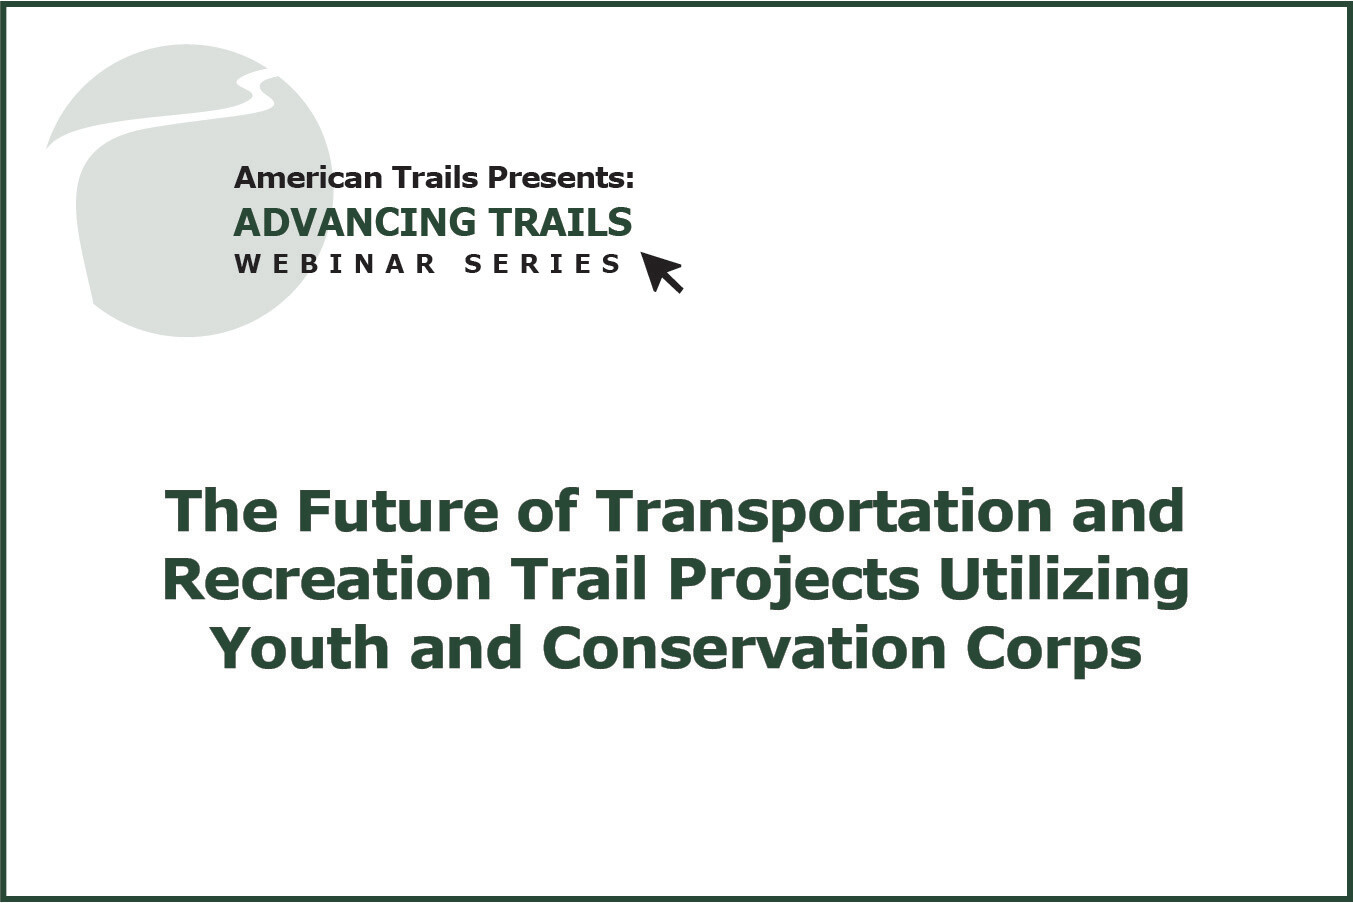 The Future of Transportation and Recreation Trail Projects Utilizing Youth and Conservation Corps (RECORDING)